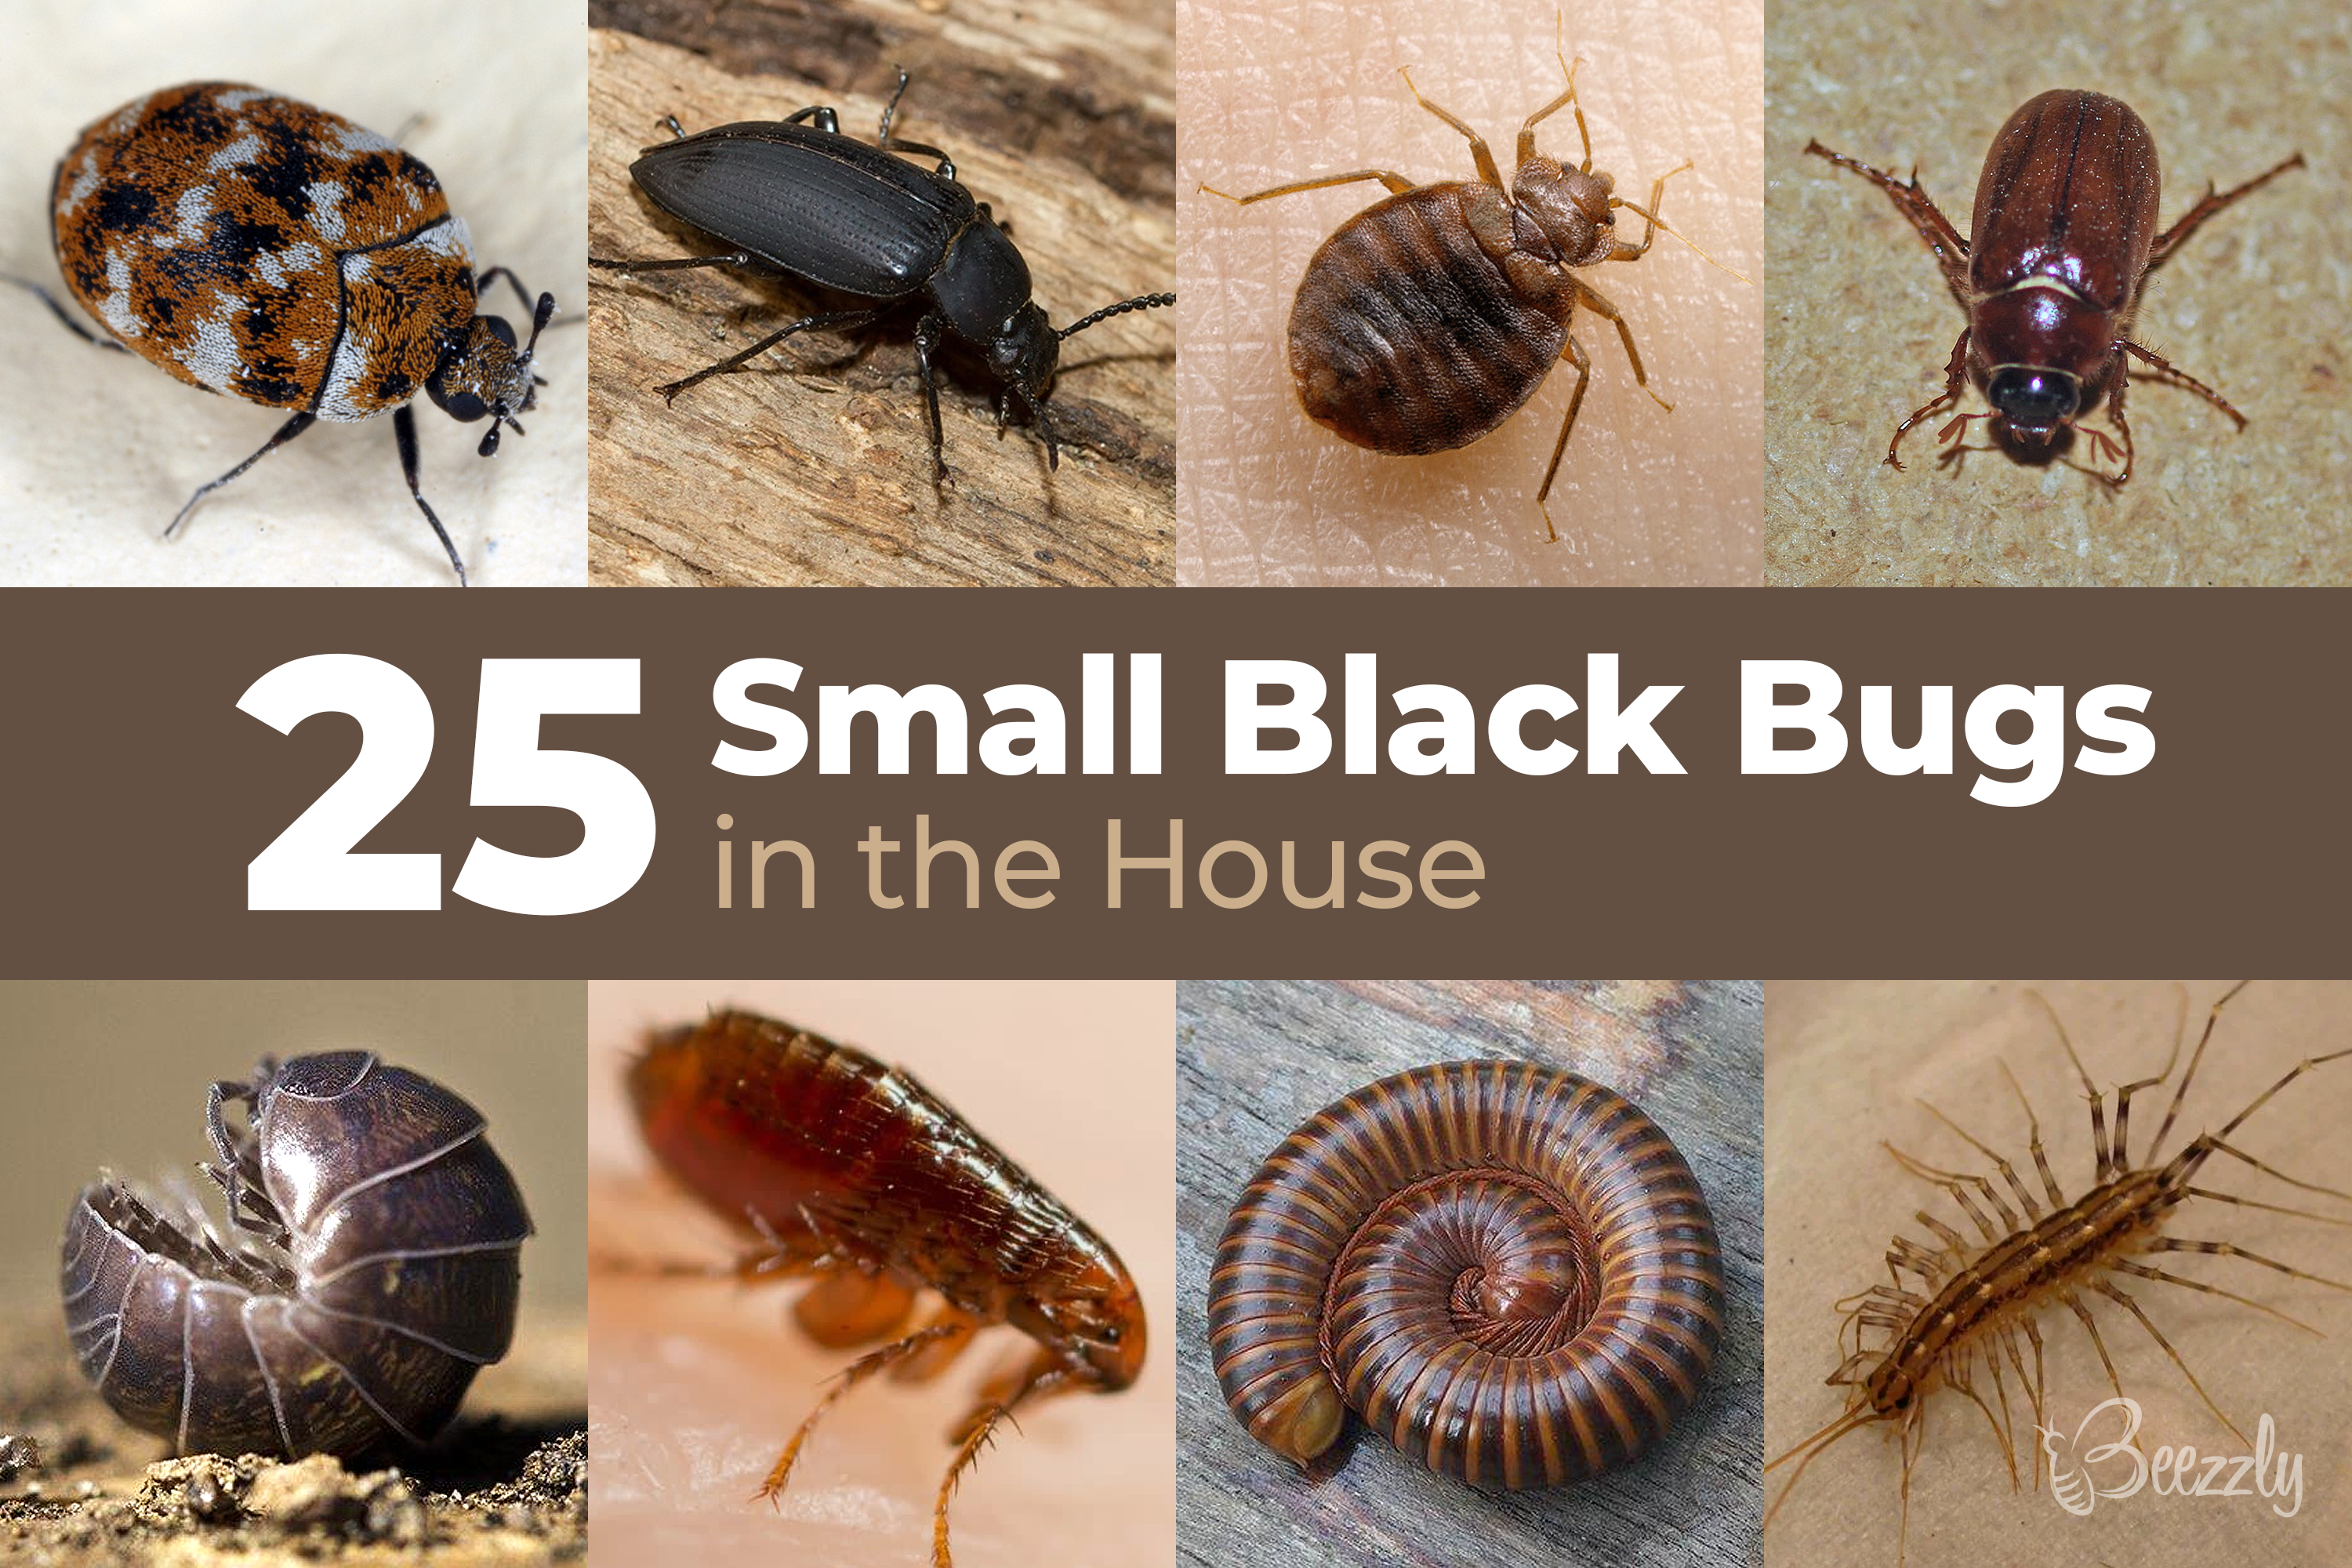 25 Small Black Bugs In The House, Little Black Bugs In My Kitchen Cupboards